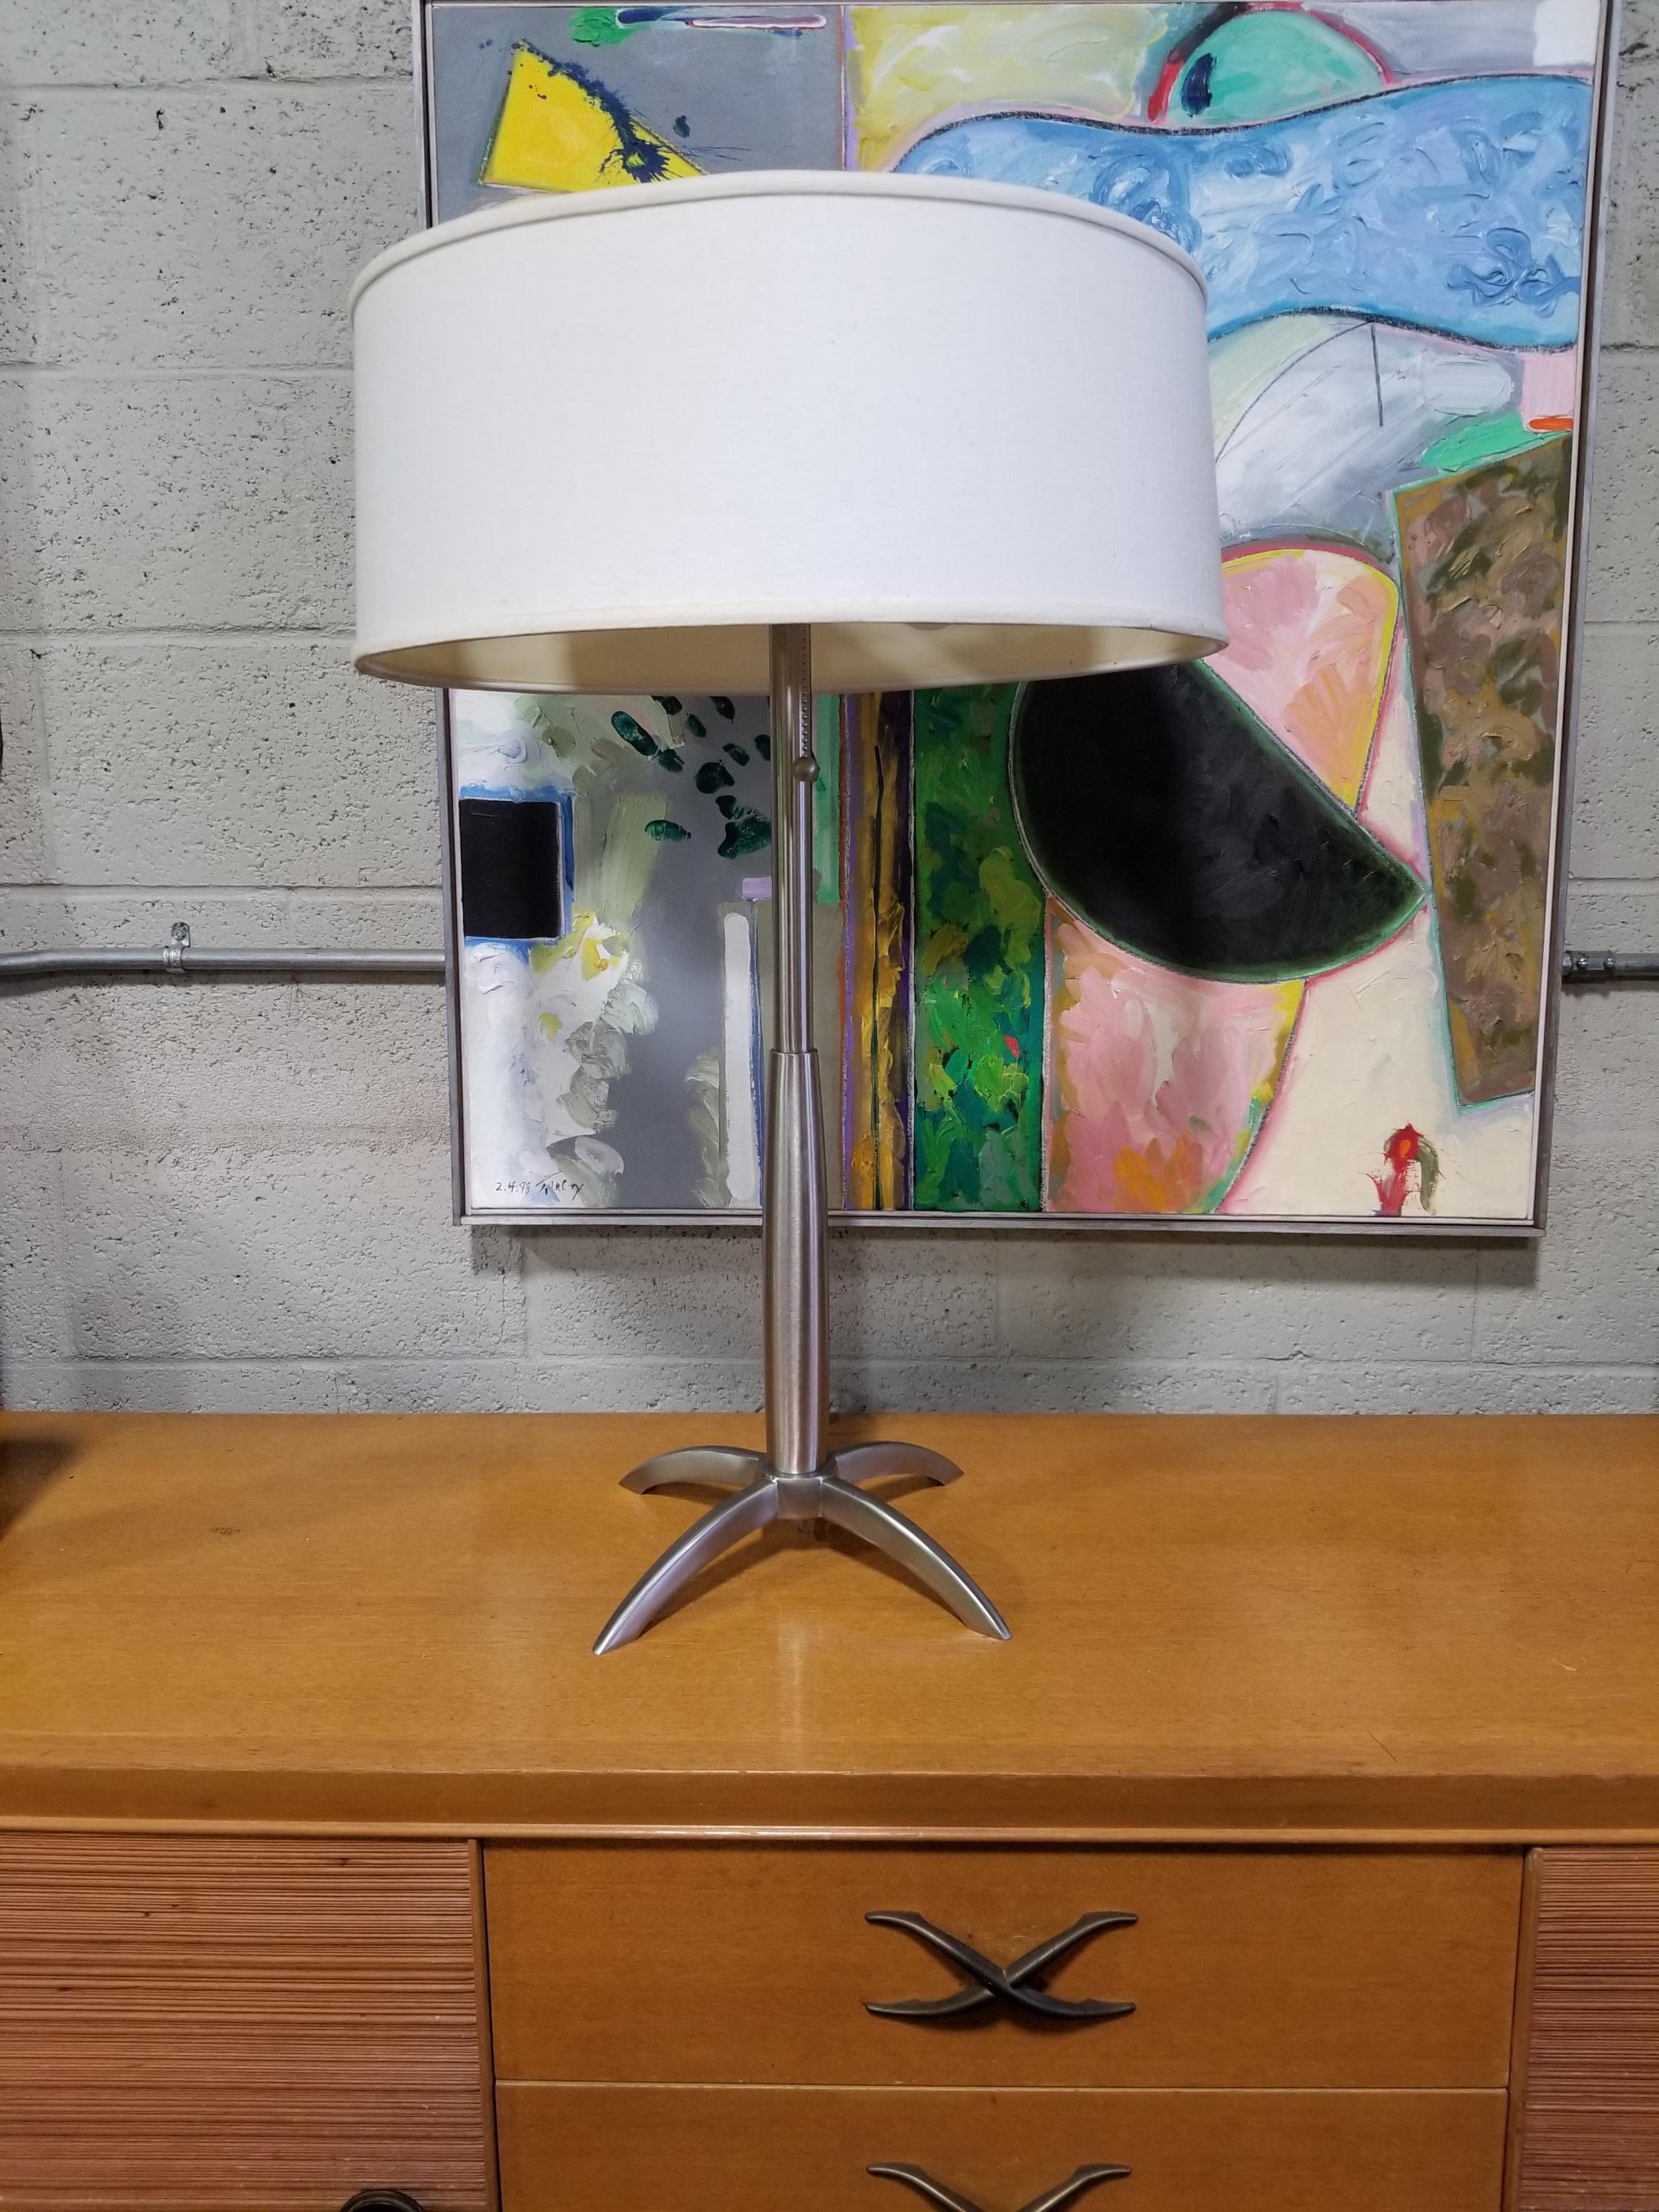 Industrial modern style steel table lamp designed by Gerald Thurston for Stiffel Lighting. Double sockets with pierced metal light defuser. Original shade. Retains Stiffel label. Excellent original condition with light wear to shade. Shade only